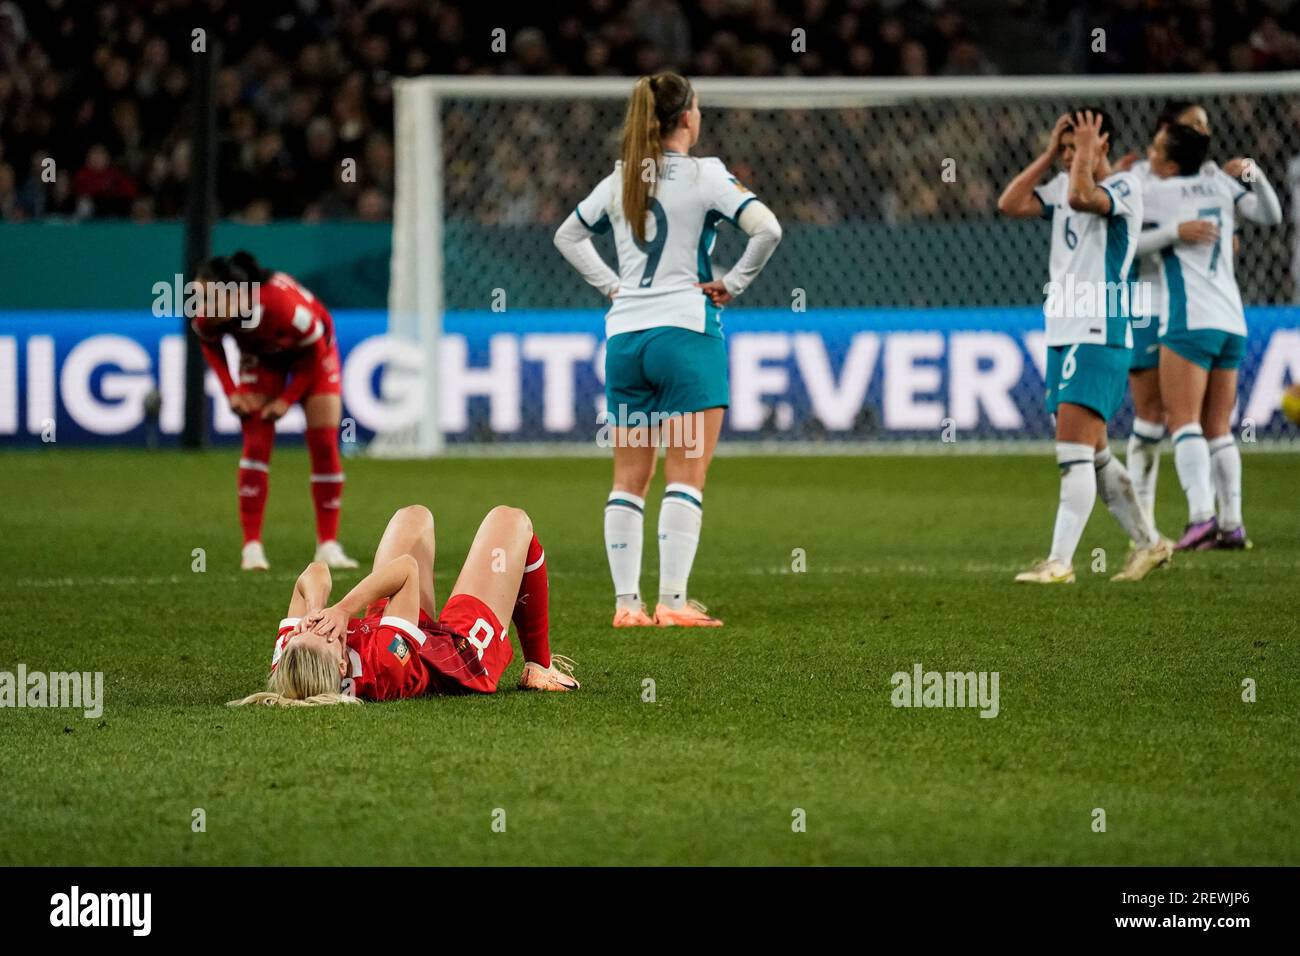 Dunedin, New Zealand. 30th July 2023. FIFA Women’s World Cup 2023 Group A - Switzerland vs New Zealand. The host team New Zealand fail to advance to the knockout stages of the 2023 FIFA Women’s World Cup after goalless draw with Switzerland. Switzerland advance as the group winner. Dat Do/Alamy Live News. Stock Photo